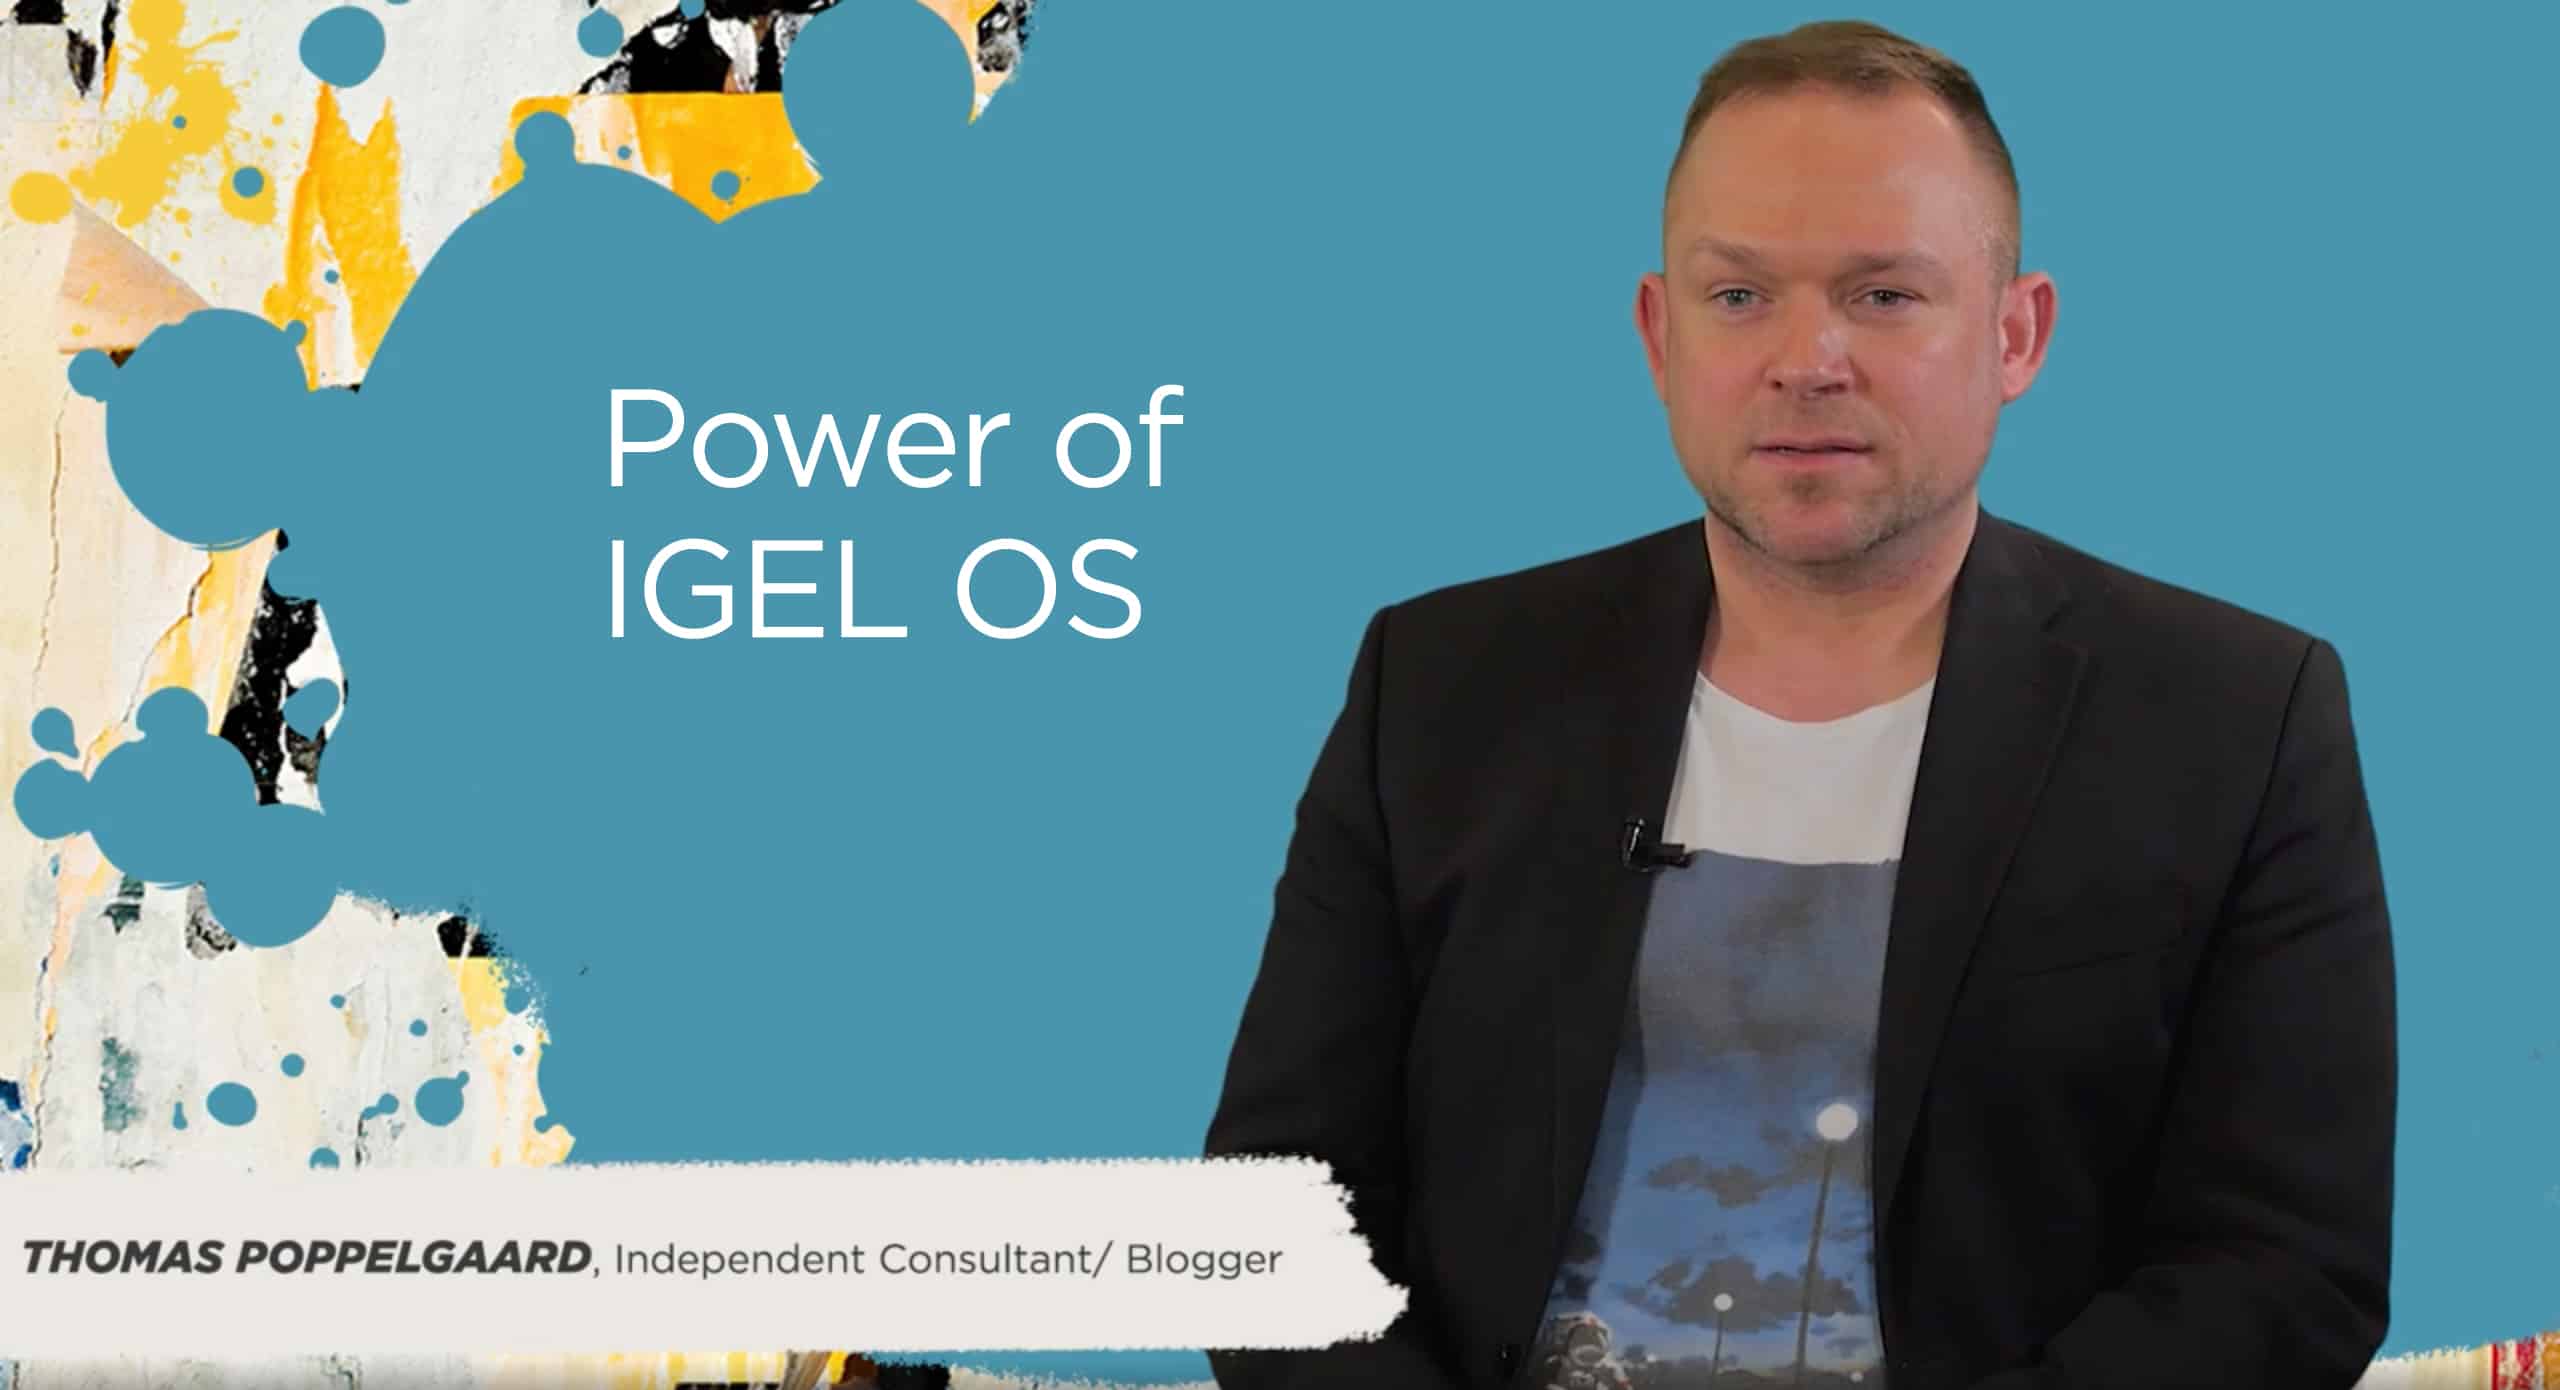 The Power of IGEL OS